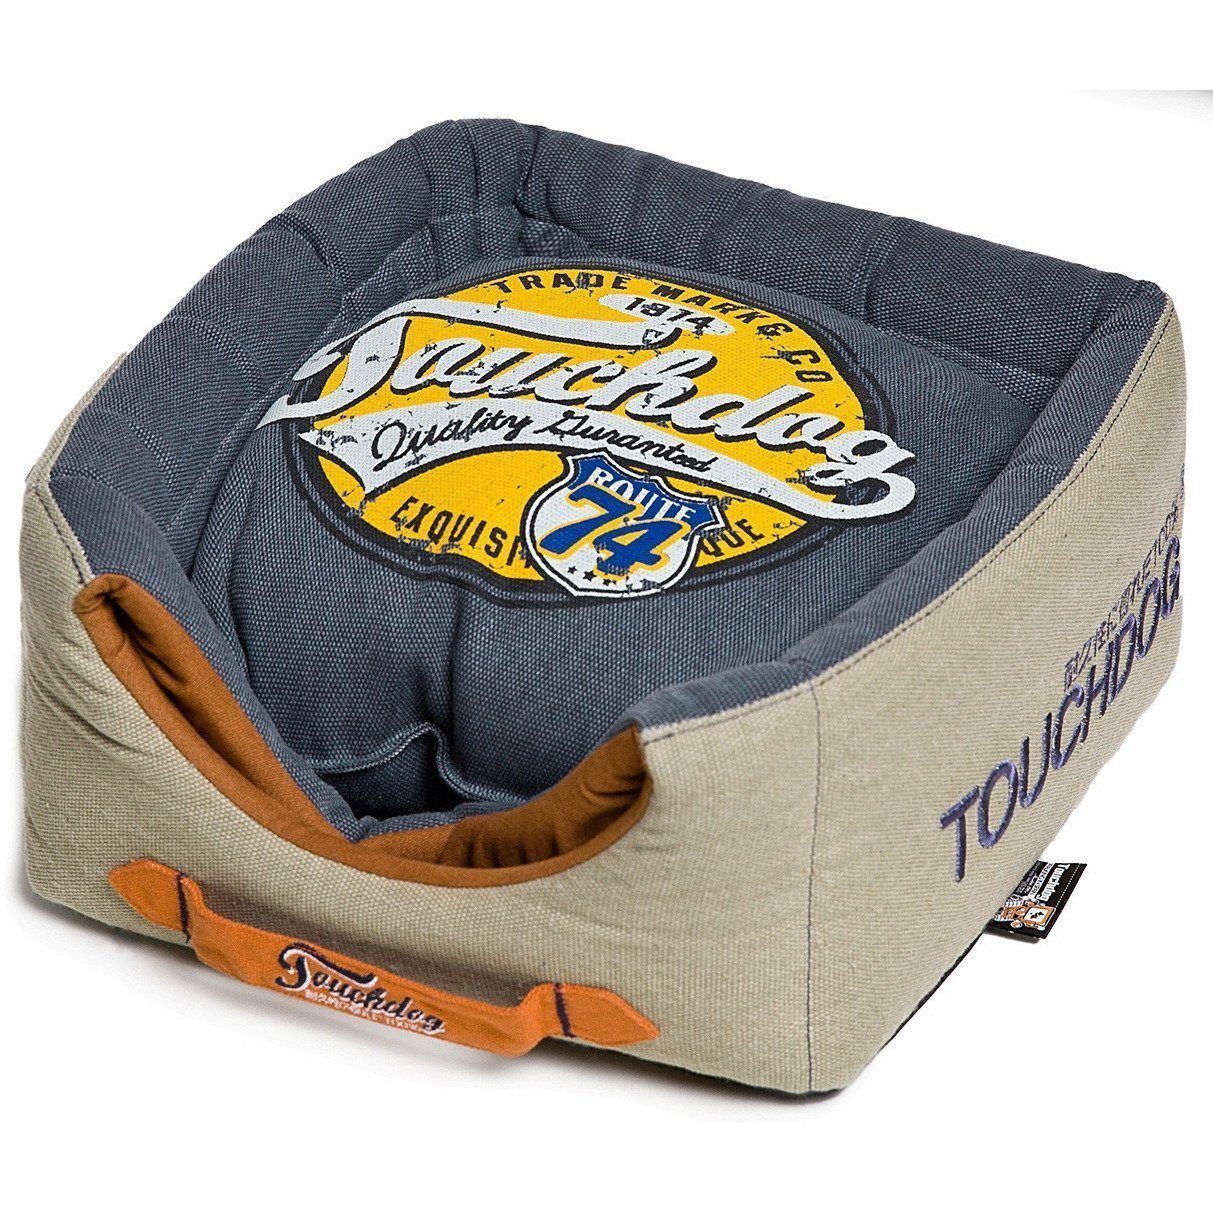 Touchdog ® 'Vintage Squared' 2-in-1 Convertible and Collapsible Dog and Cat Bed Navy Blue, Beige 